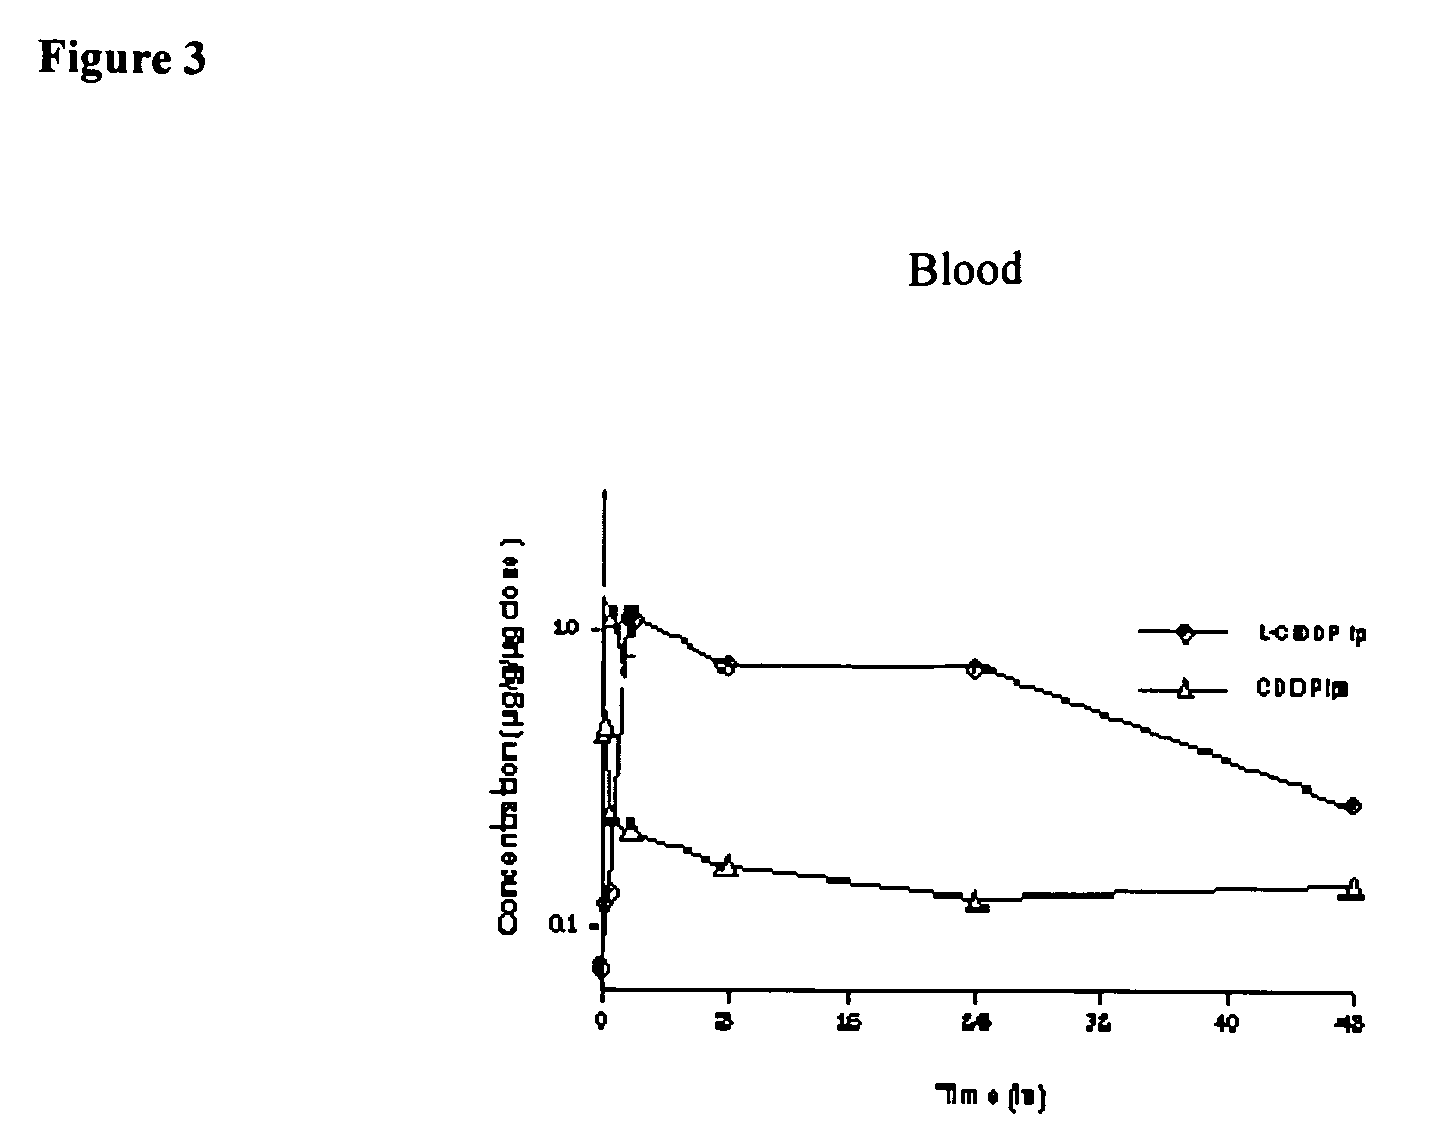 Methods of Treating Cancer with High Potency Lipid-Based Platinum Compound Formulations Administered Intraperitoneally